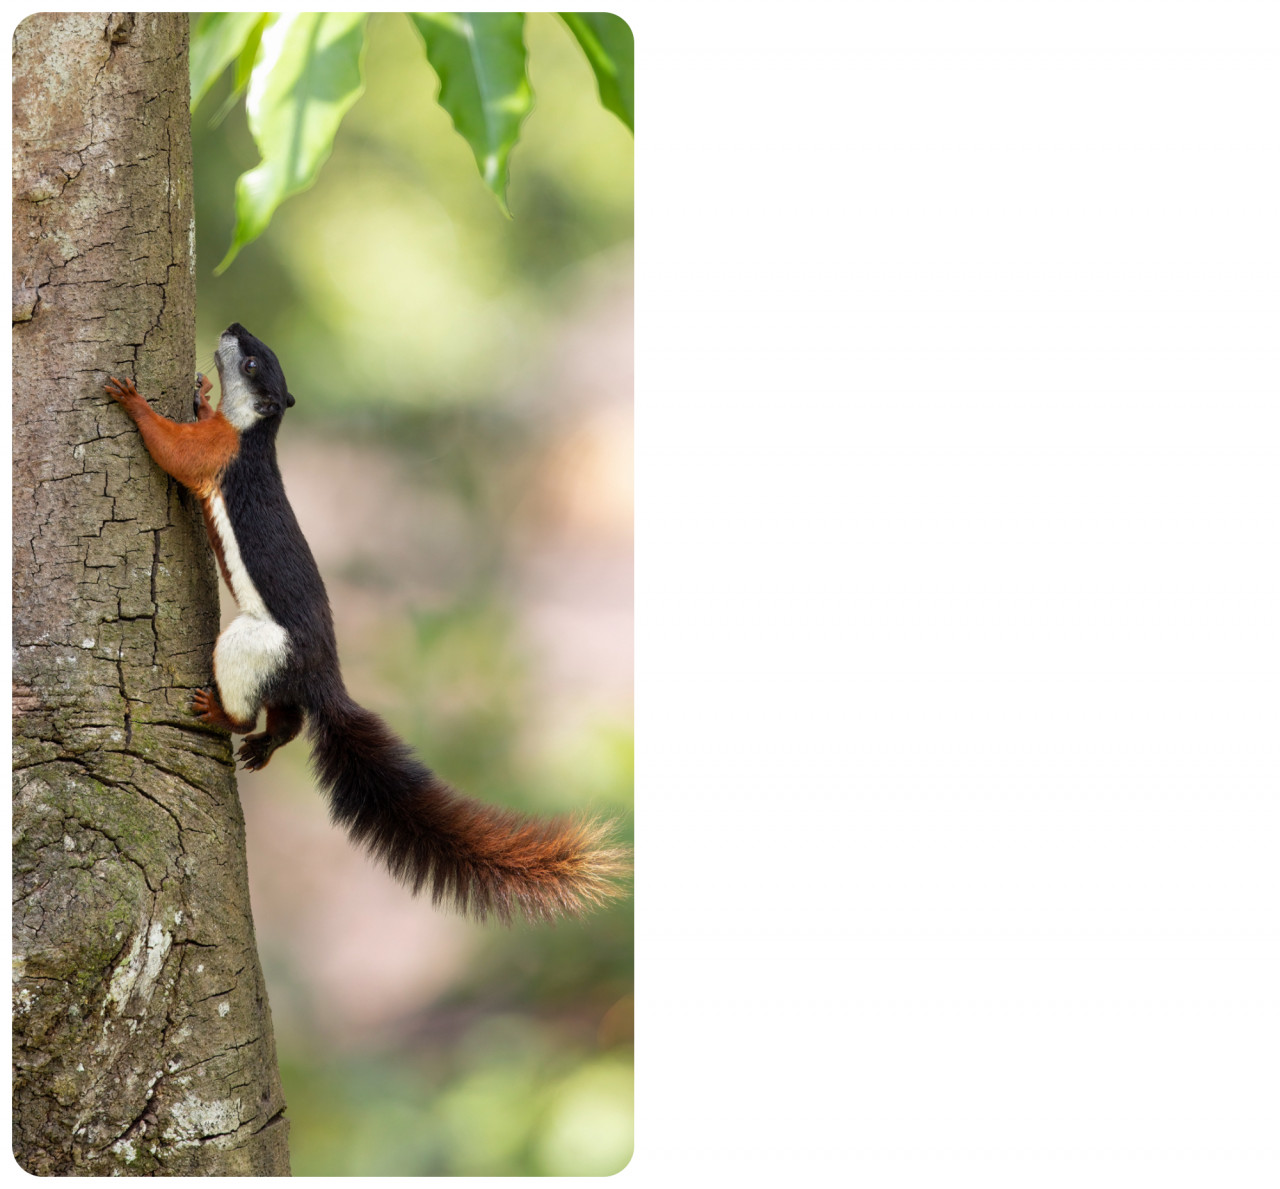 Being such a biodiverse nation, we have many species of squirrels which includes the beautiful Asian Tri-Coloured Squirrel or Prevost's Squirrel. Like many of our other squirrel species, they make nests out of twigs and leaves, much like a bird's nest, to sleep in and to birth their litter. – Pic courtesy of Peter Ong